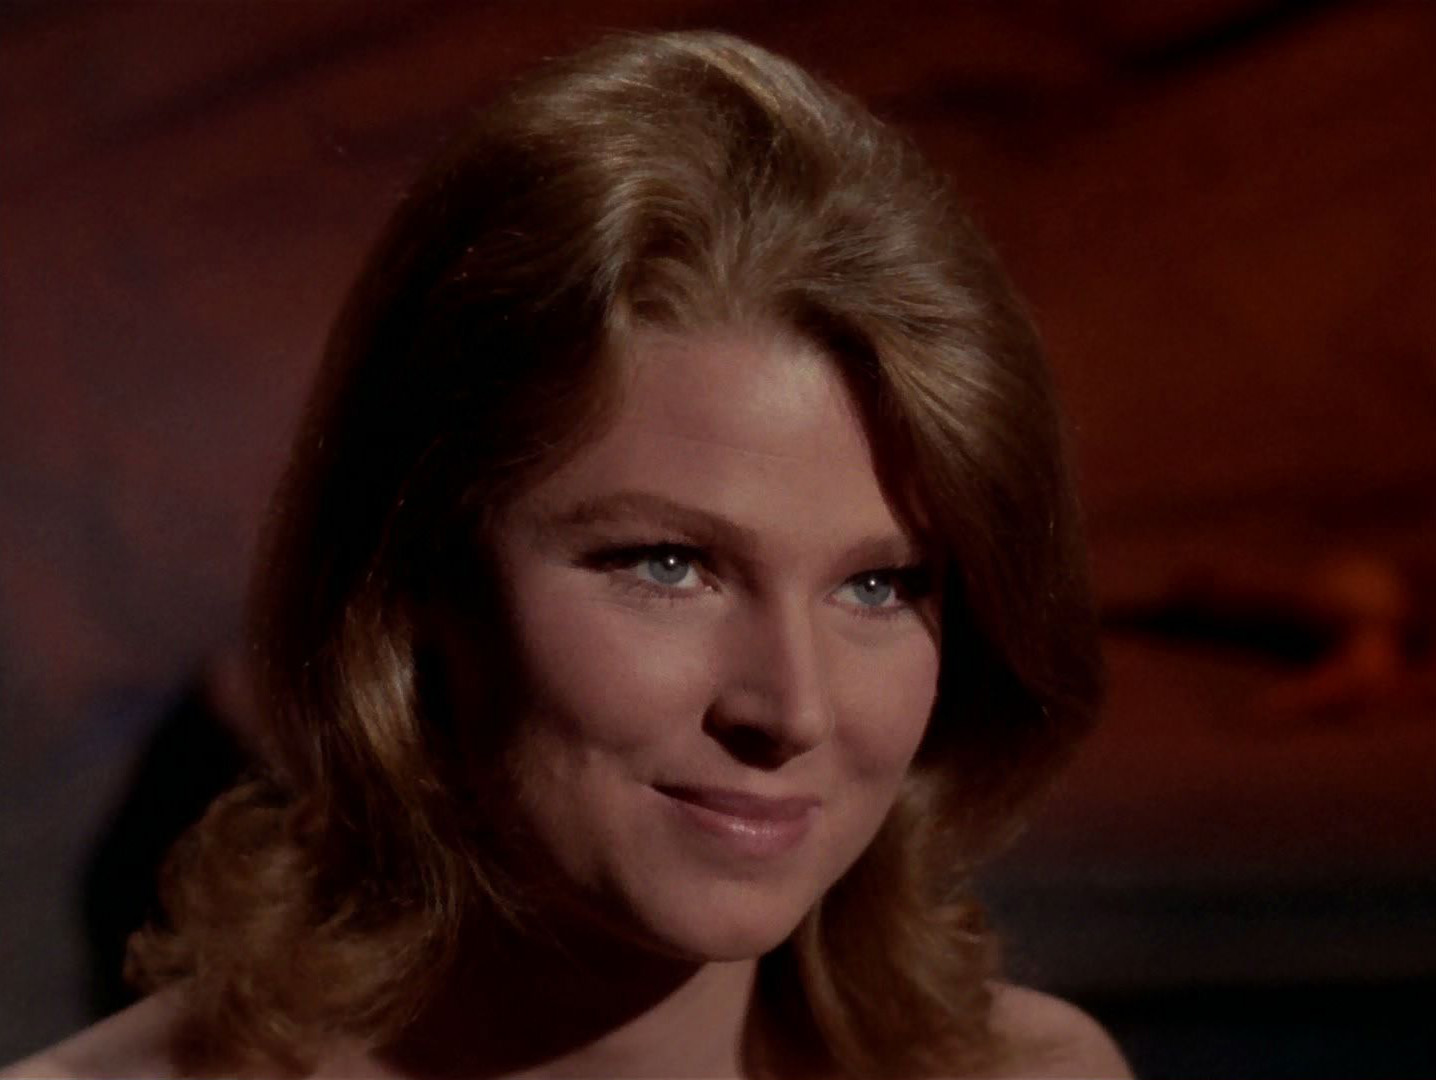 More Pictures Of Mariette Hartley. mariette hartley pictures. 